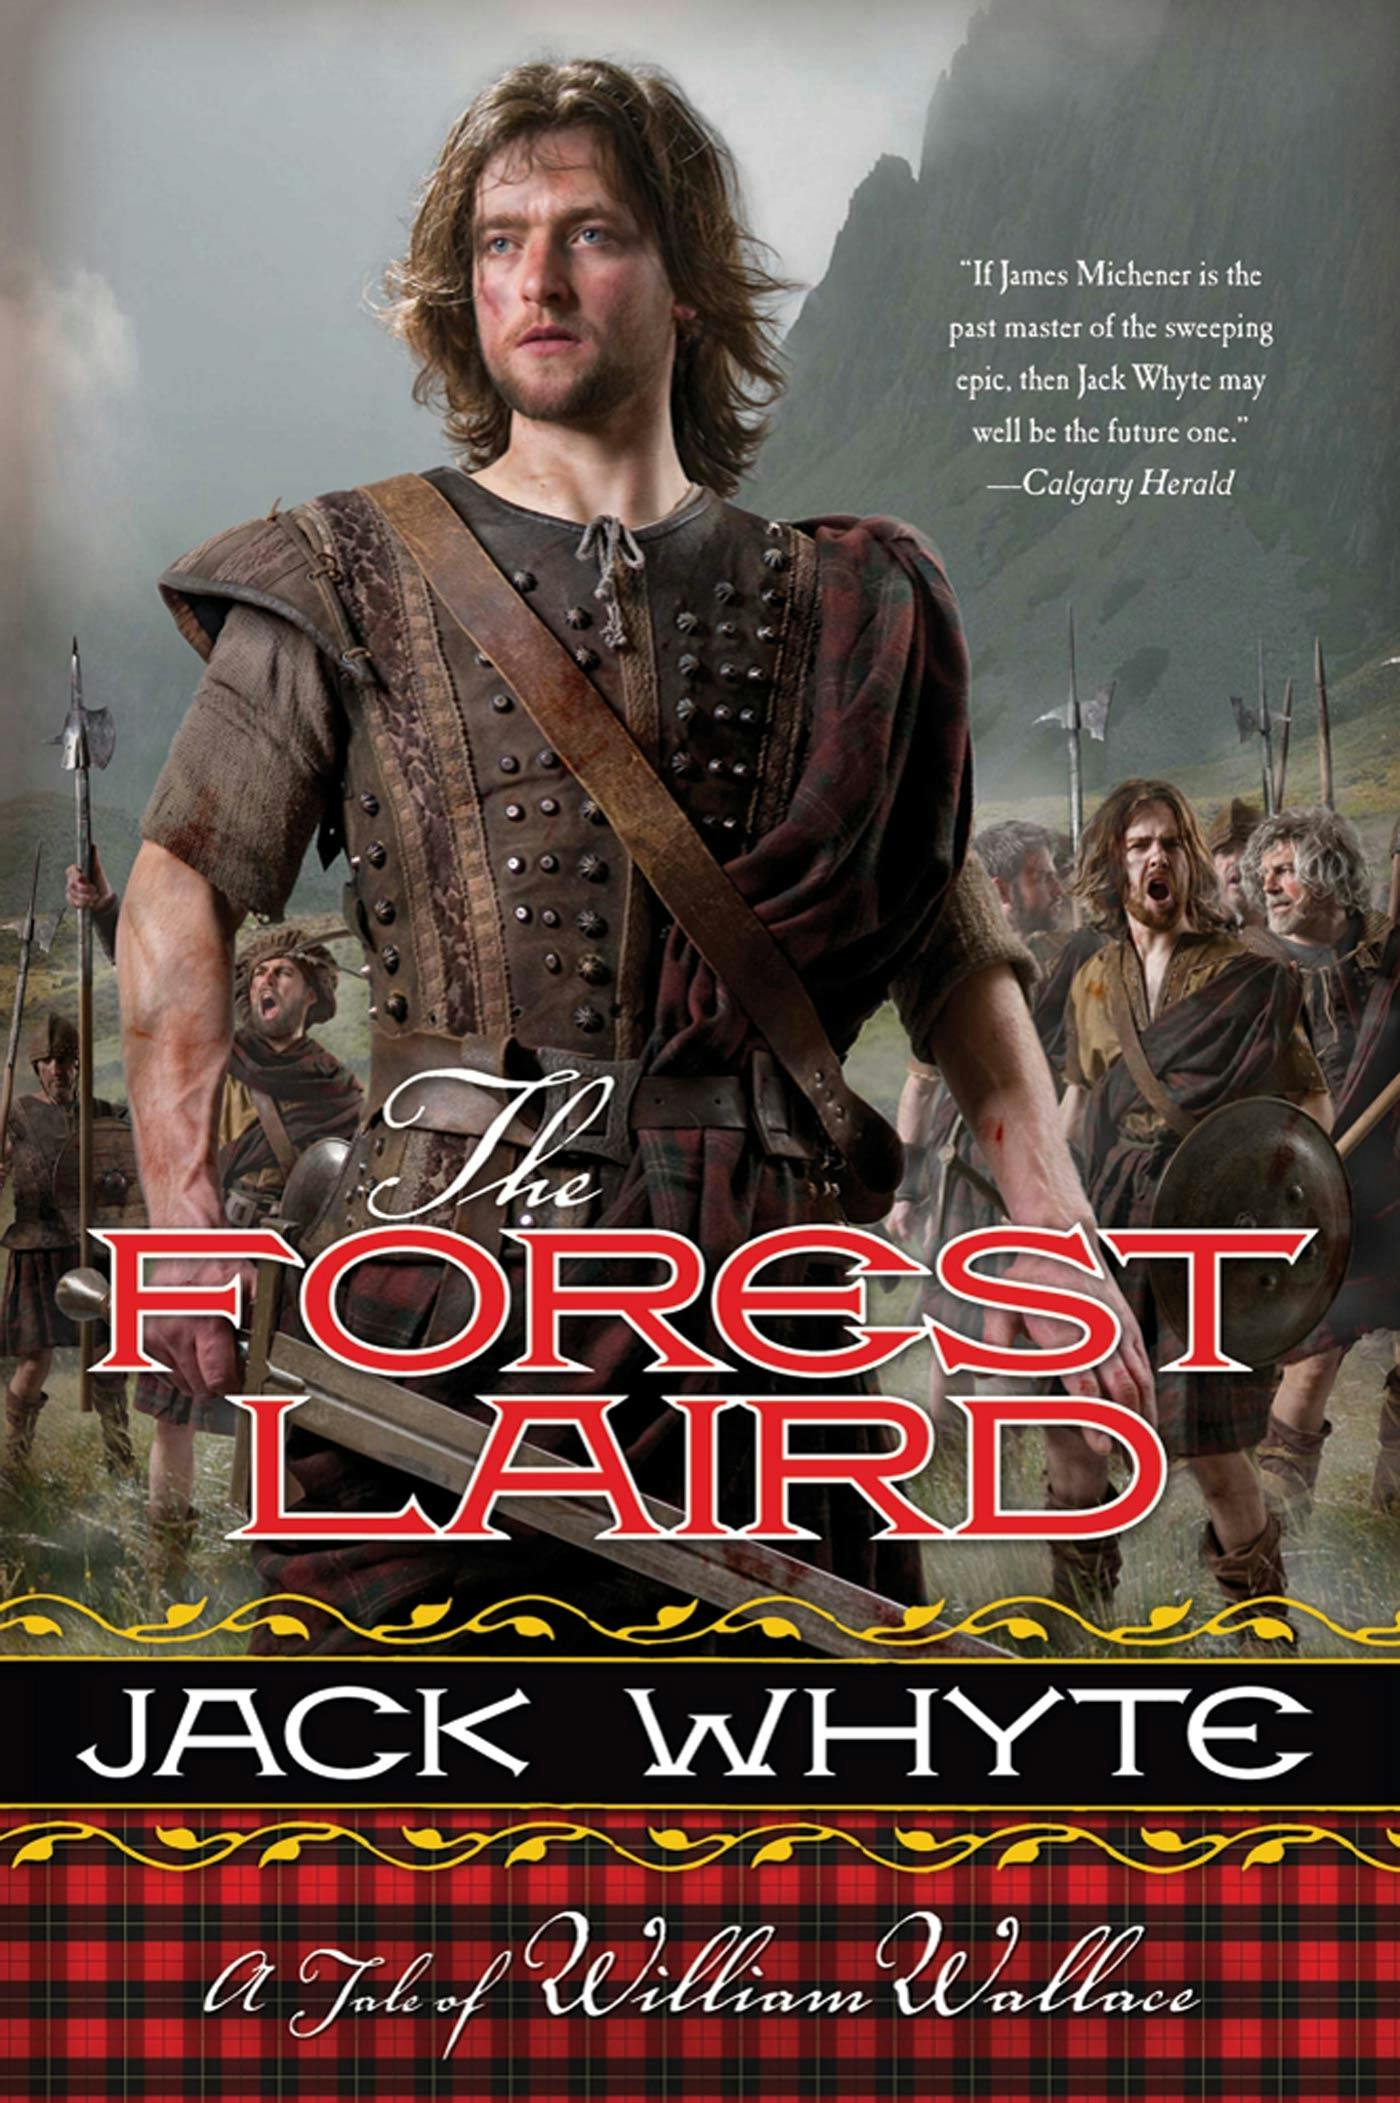 Cover for the book titled as: The Forest Laird